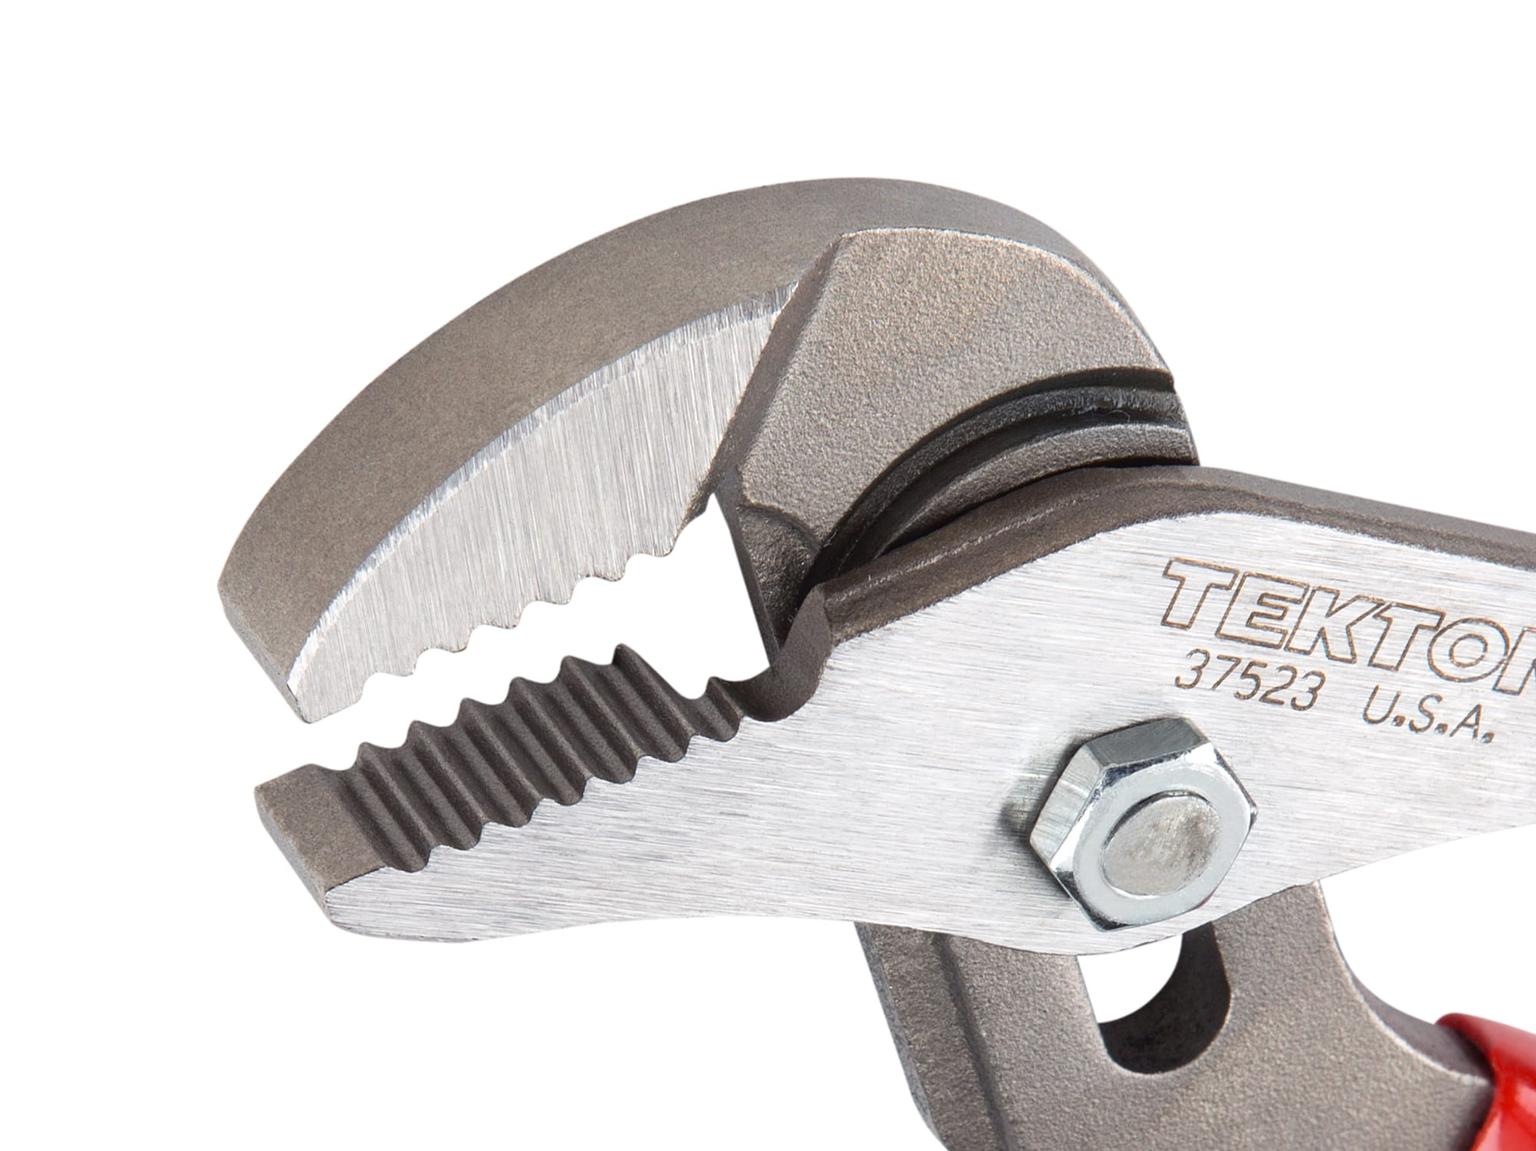 TEKTON 37523-T 7 Inch Groove Joint Pliers (1 in. Jaw)